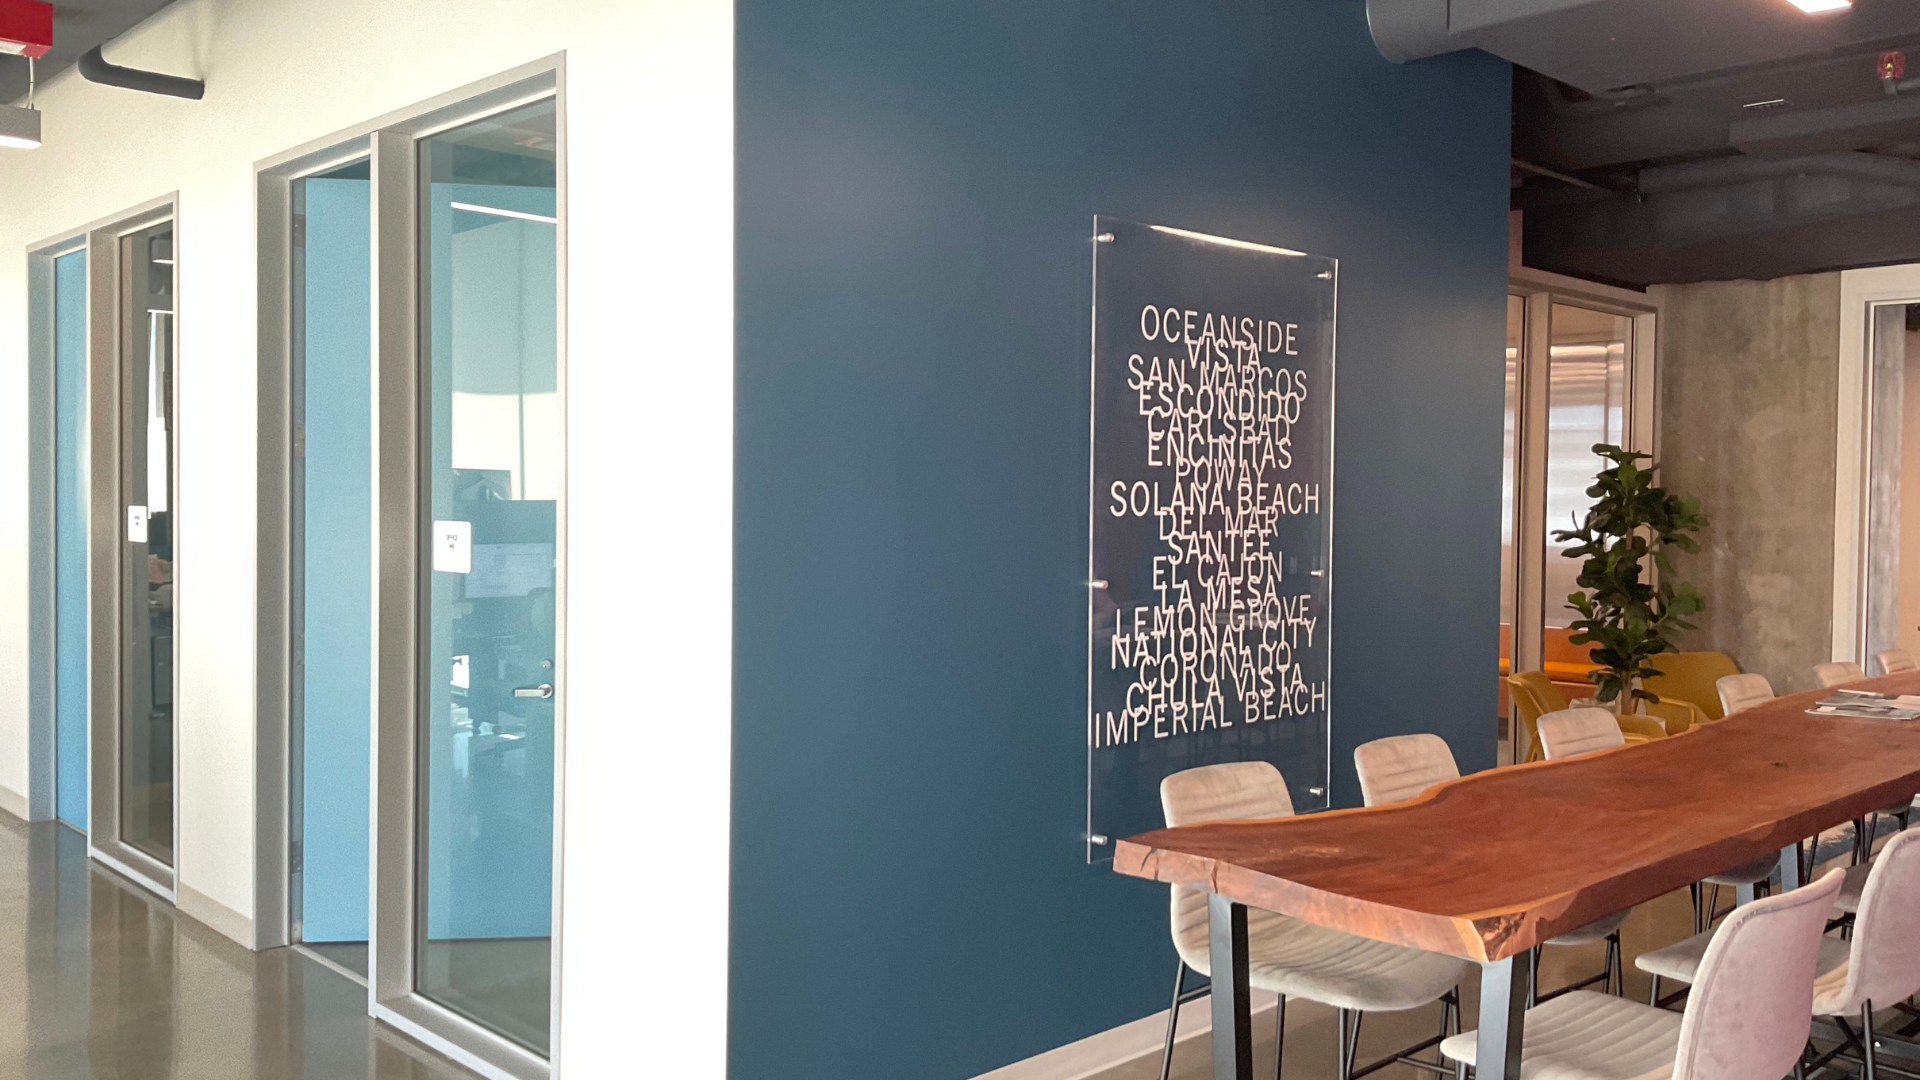 Commercial office interior design, blue wall with text wall decor behind wood meeting table and chairs, individual offices with glass doors and white walls